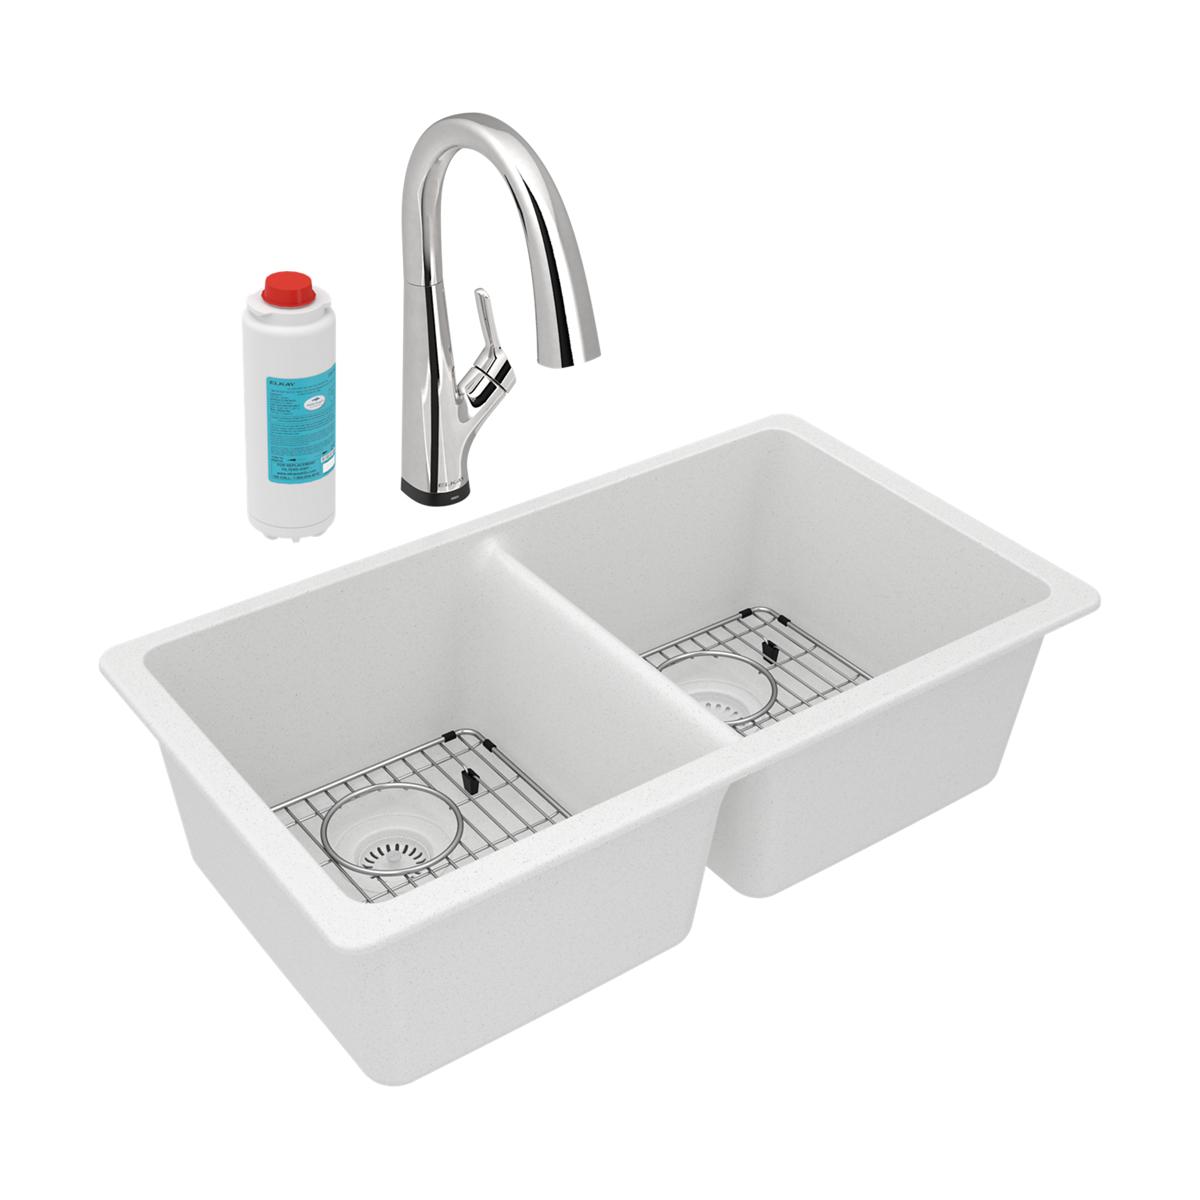 Elkay Quartz Classic 33" x 18-1/2" x 9-1/2" Equal Double Bowl Undermount Sink Kit with Filtered Faucet